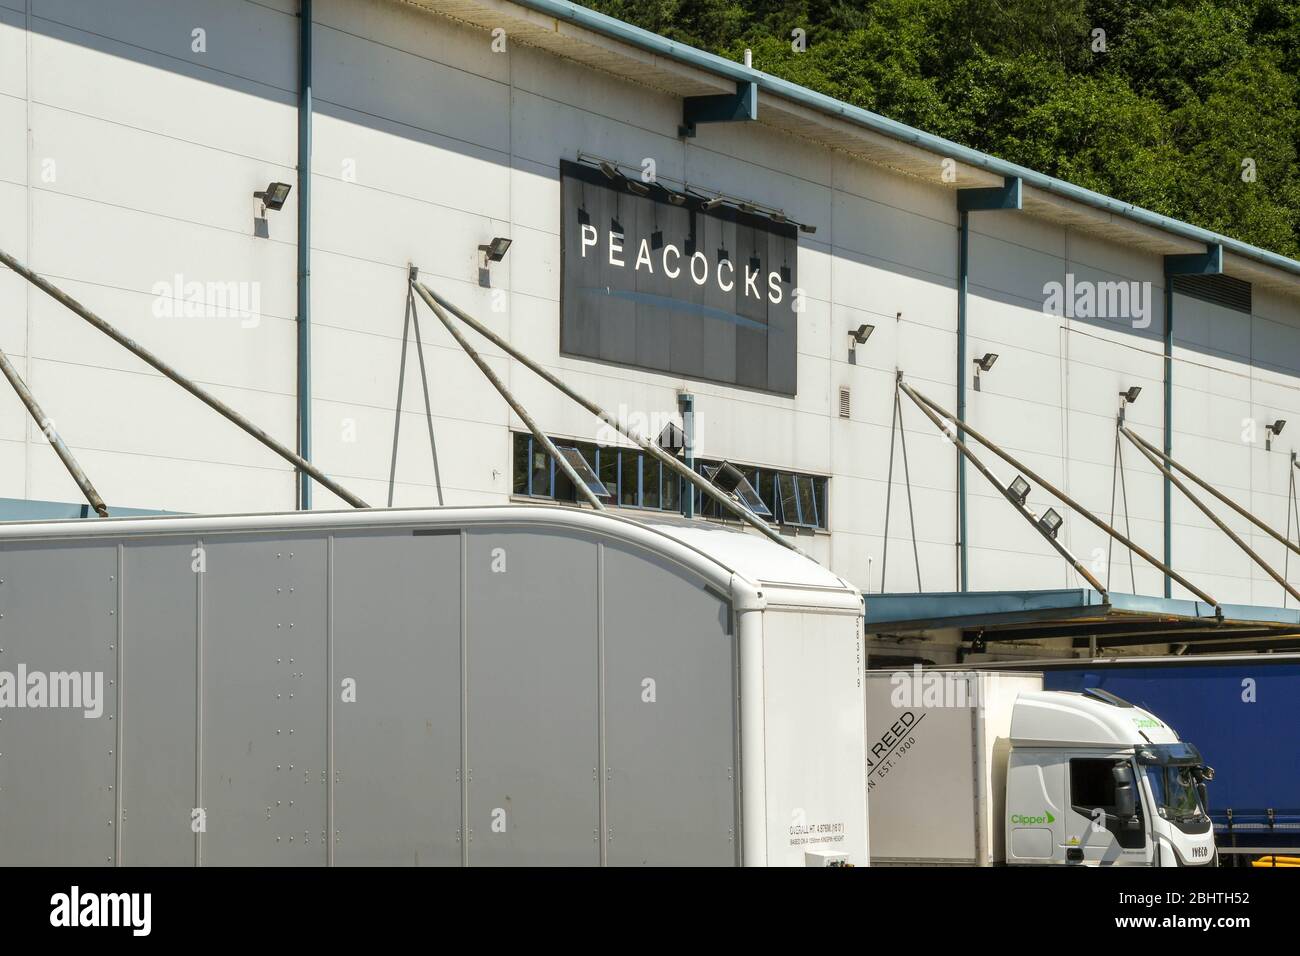 NANTGARW, NEAR CARDIFF, WALES - JUNE 2018: Landscape view of trailers outside a Peacocks distribution centre at Nantgarw, near the M4 north of Cardiff Stock Photo